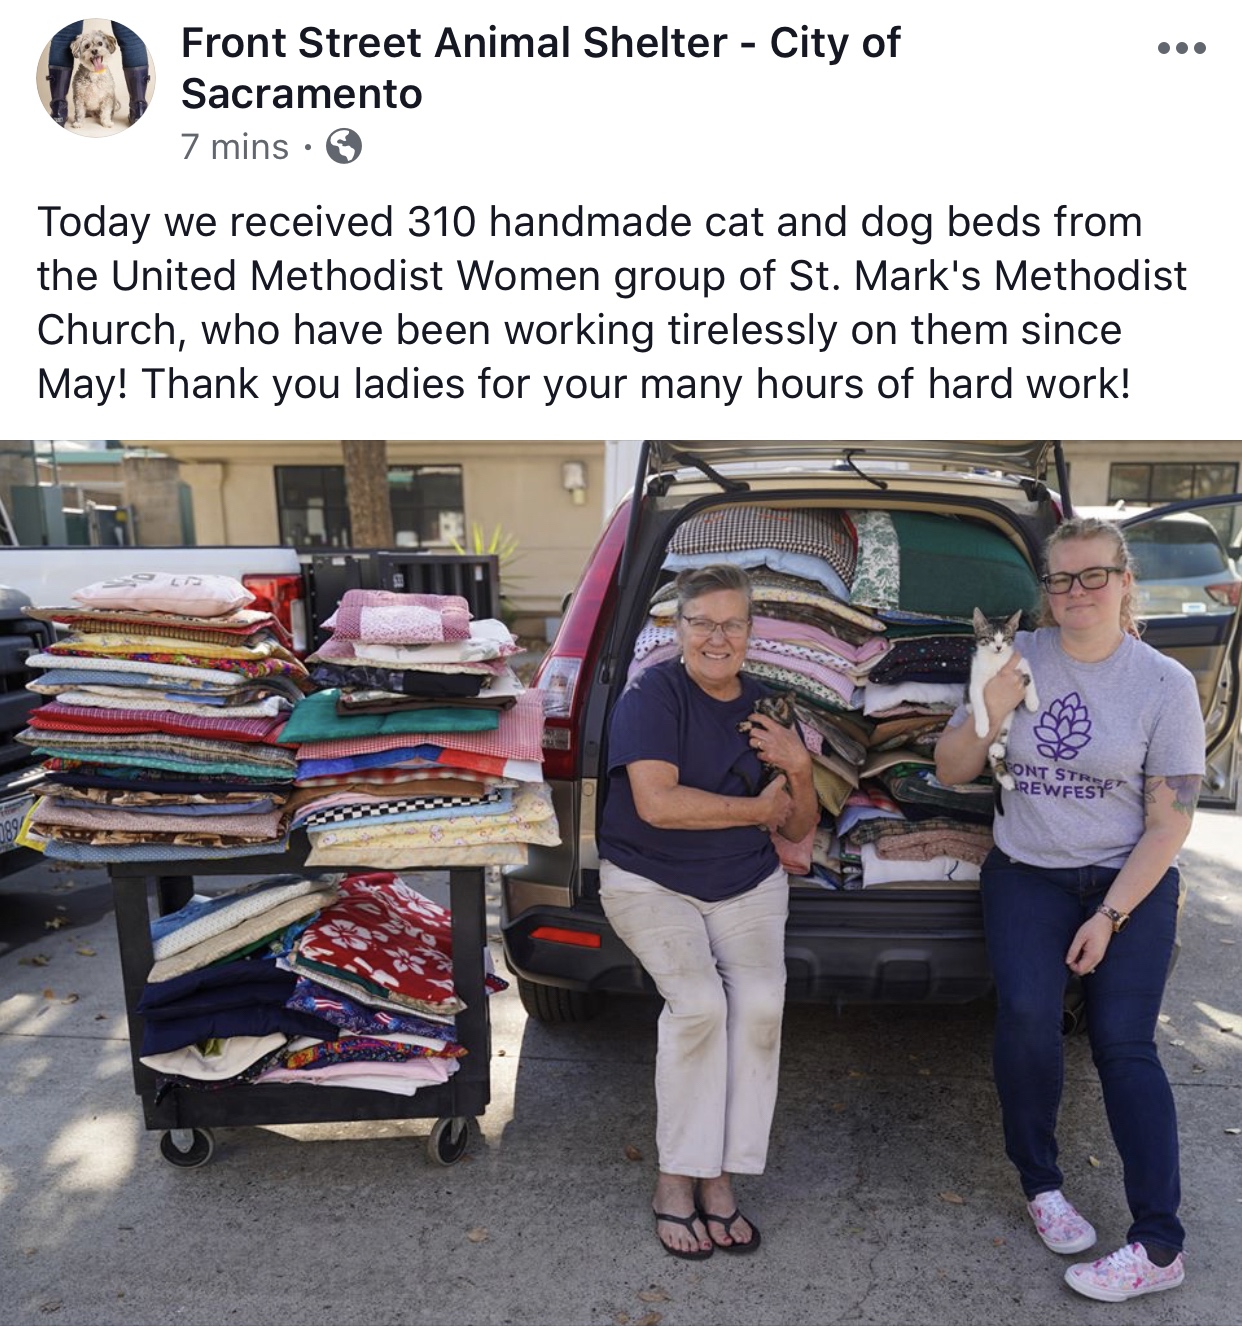 wholesome meme - car - Front Street Animal Shelter City of Sacramento 7 mins. Today we received 310 handmade cat and dog beds from the United Methodist Women group of St. Mark's Methodist Church, who have been working tirelessly on them since May! Thank y